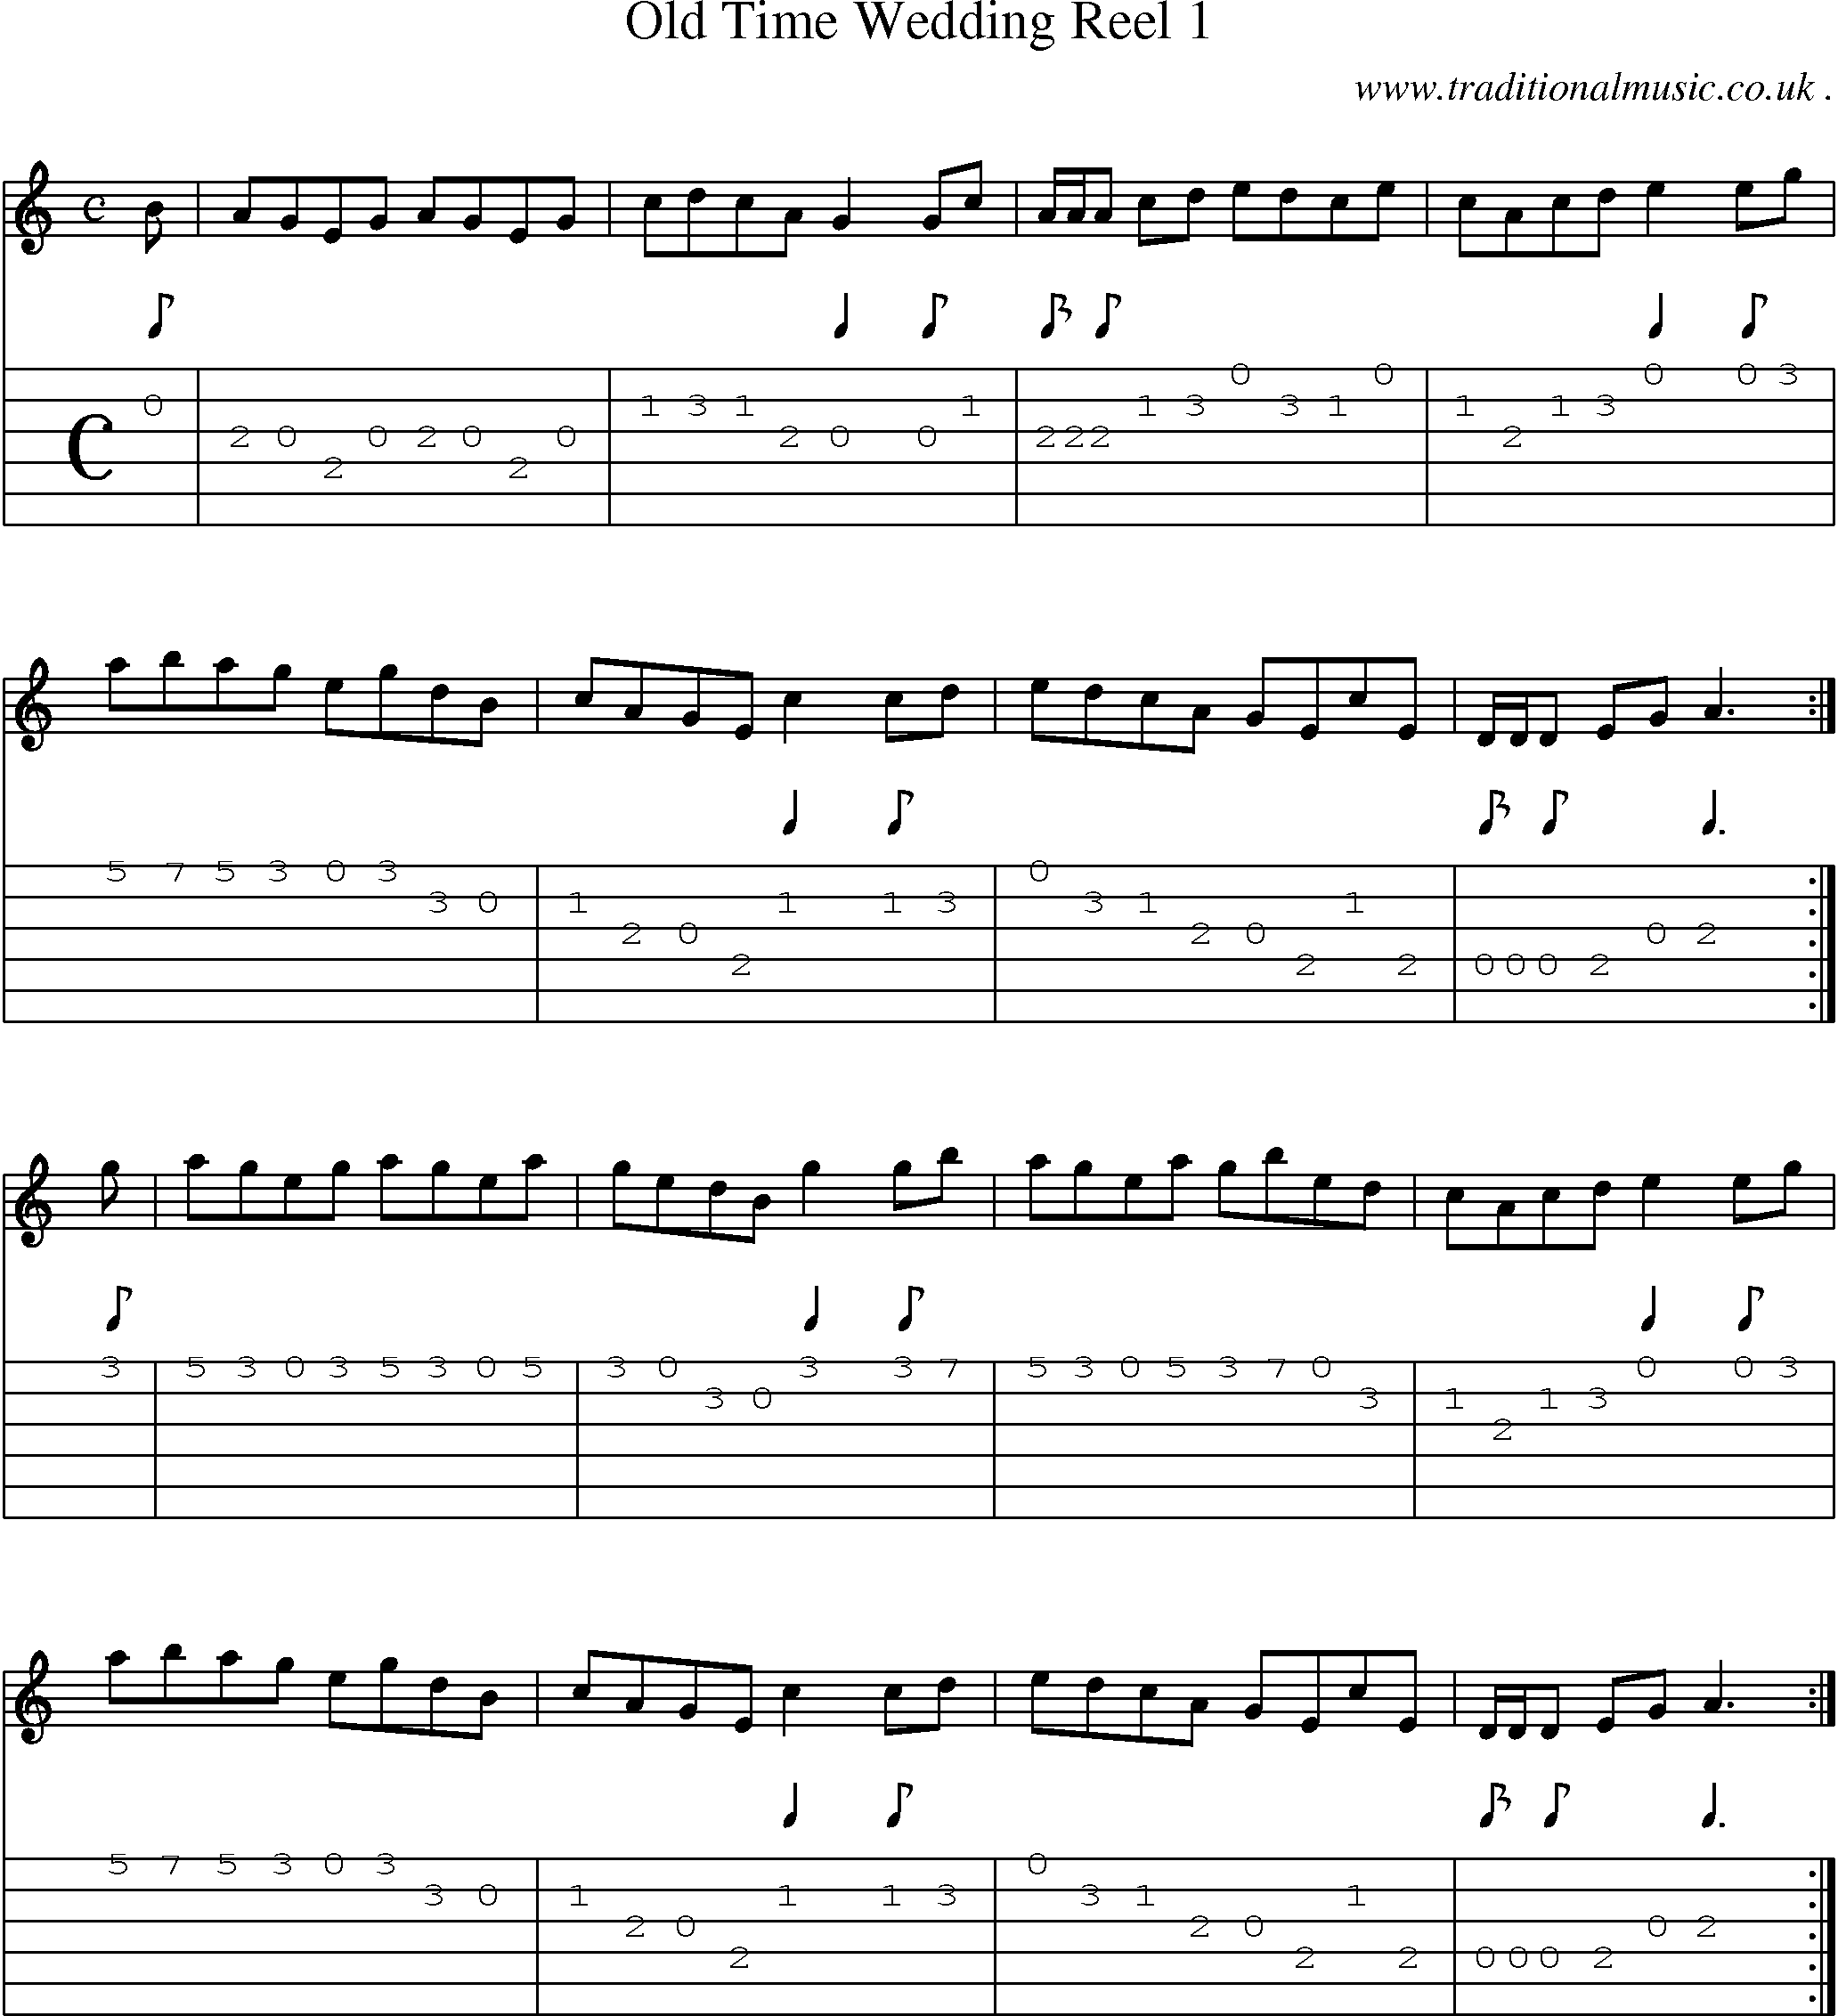 Music Score and Guitar Tabs for Old Time Wedding Reel 1